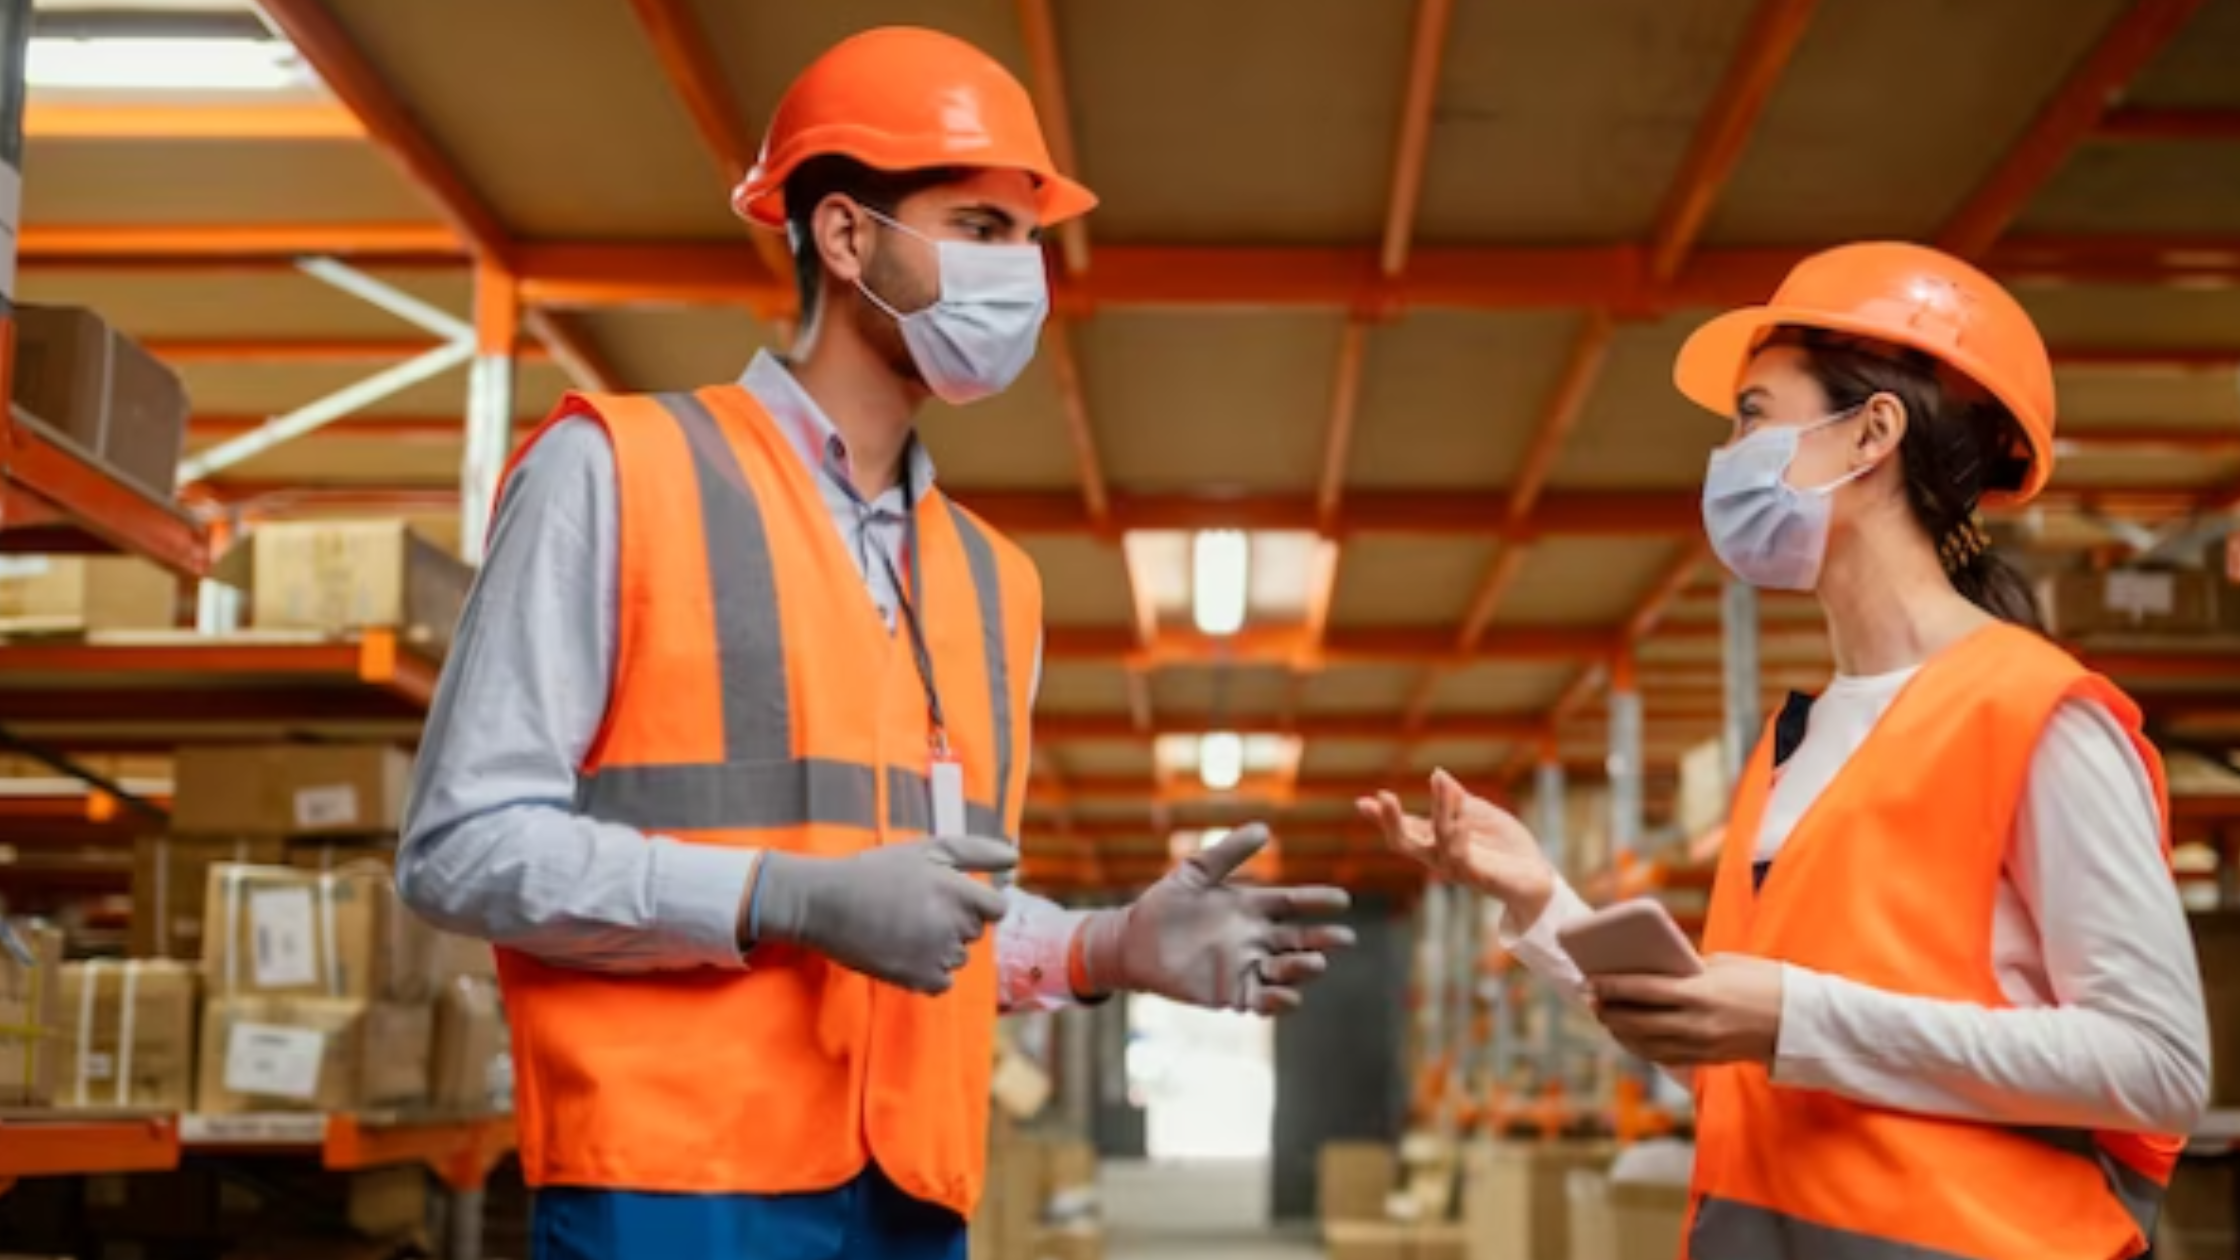 Two workers in a conversation about safety compliance at the workplace